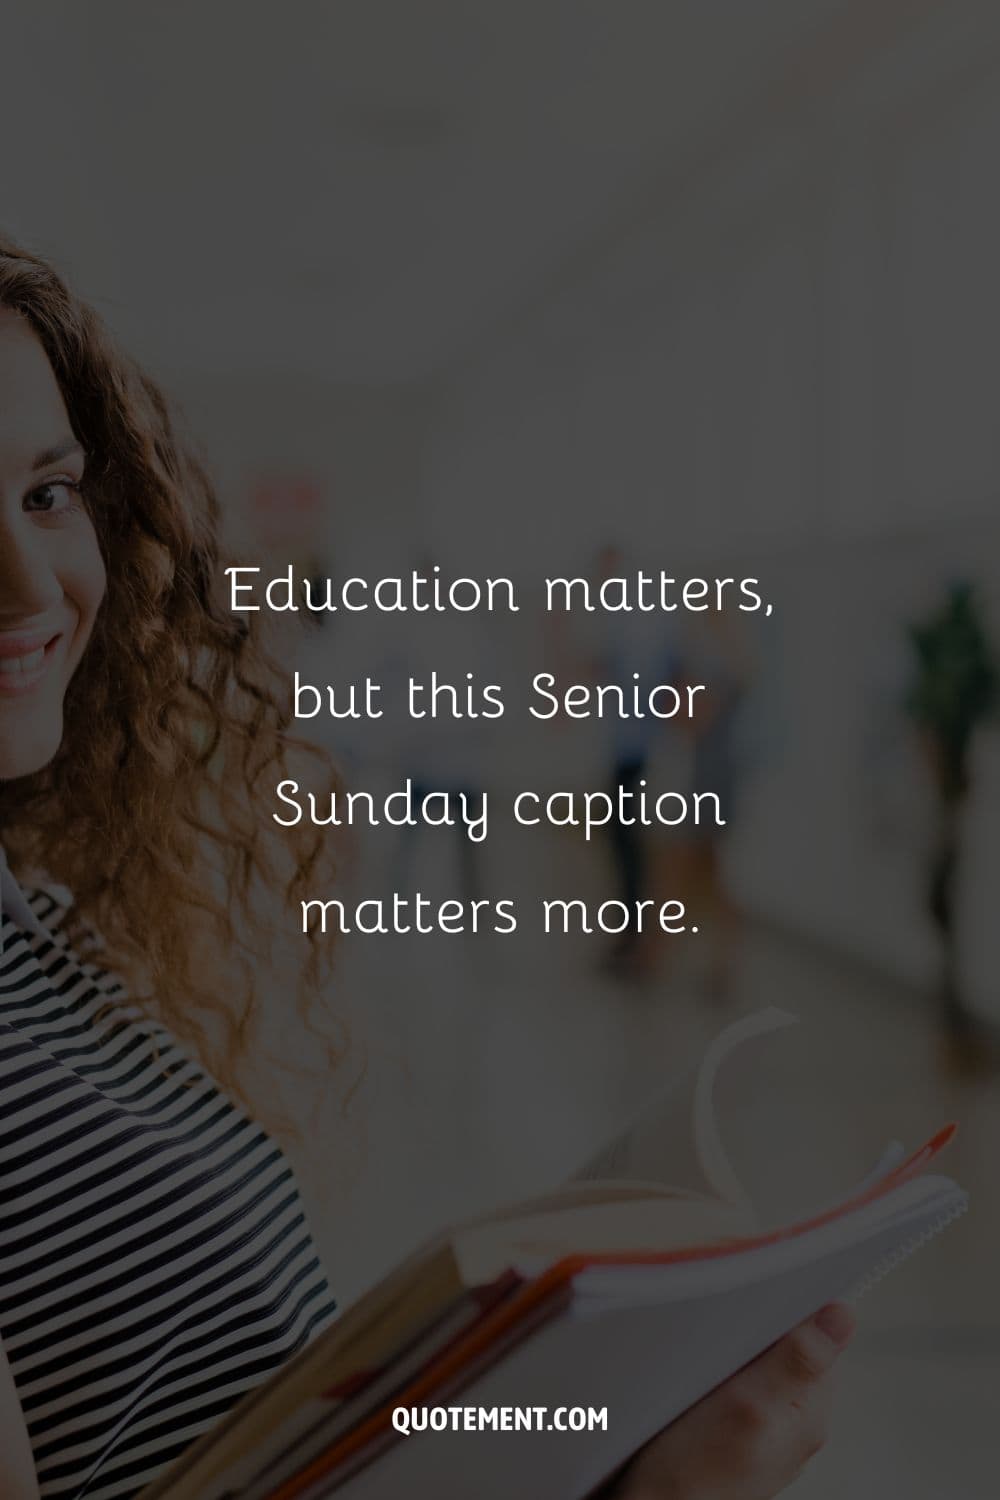 Education matters, but this Senior Sunday caption matters more.